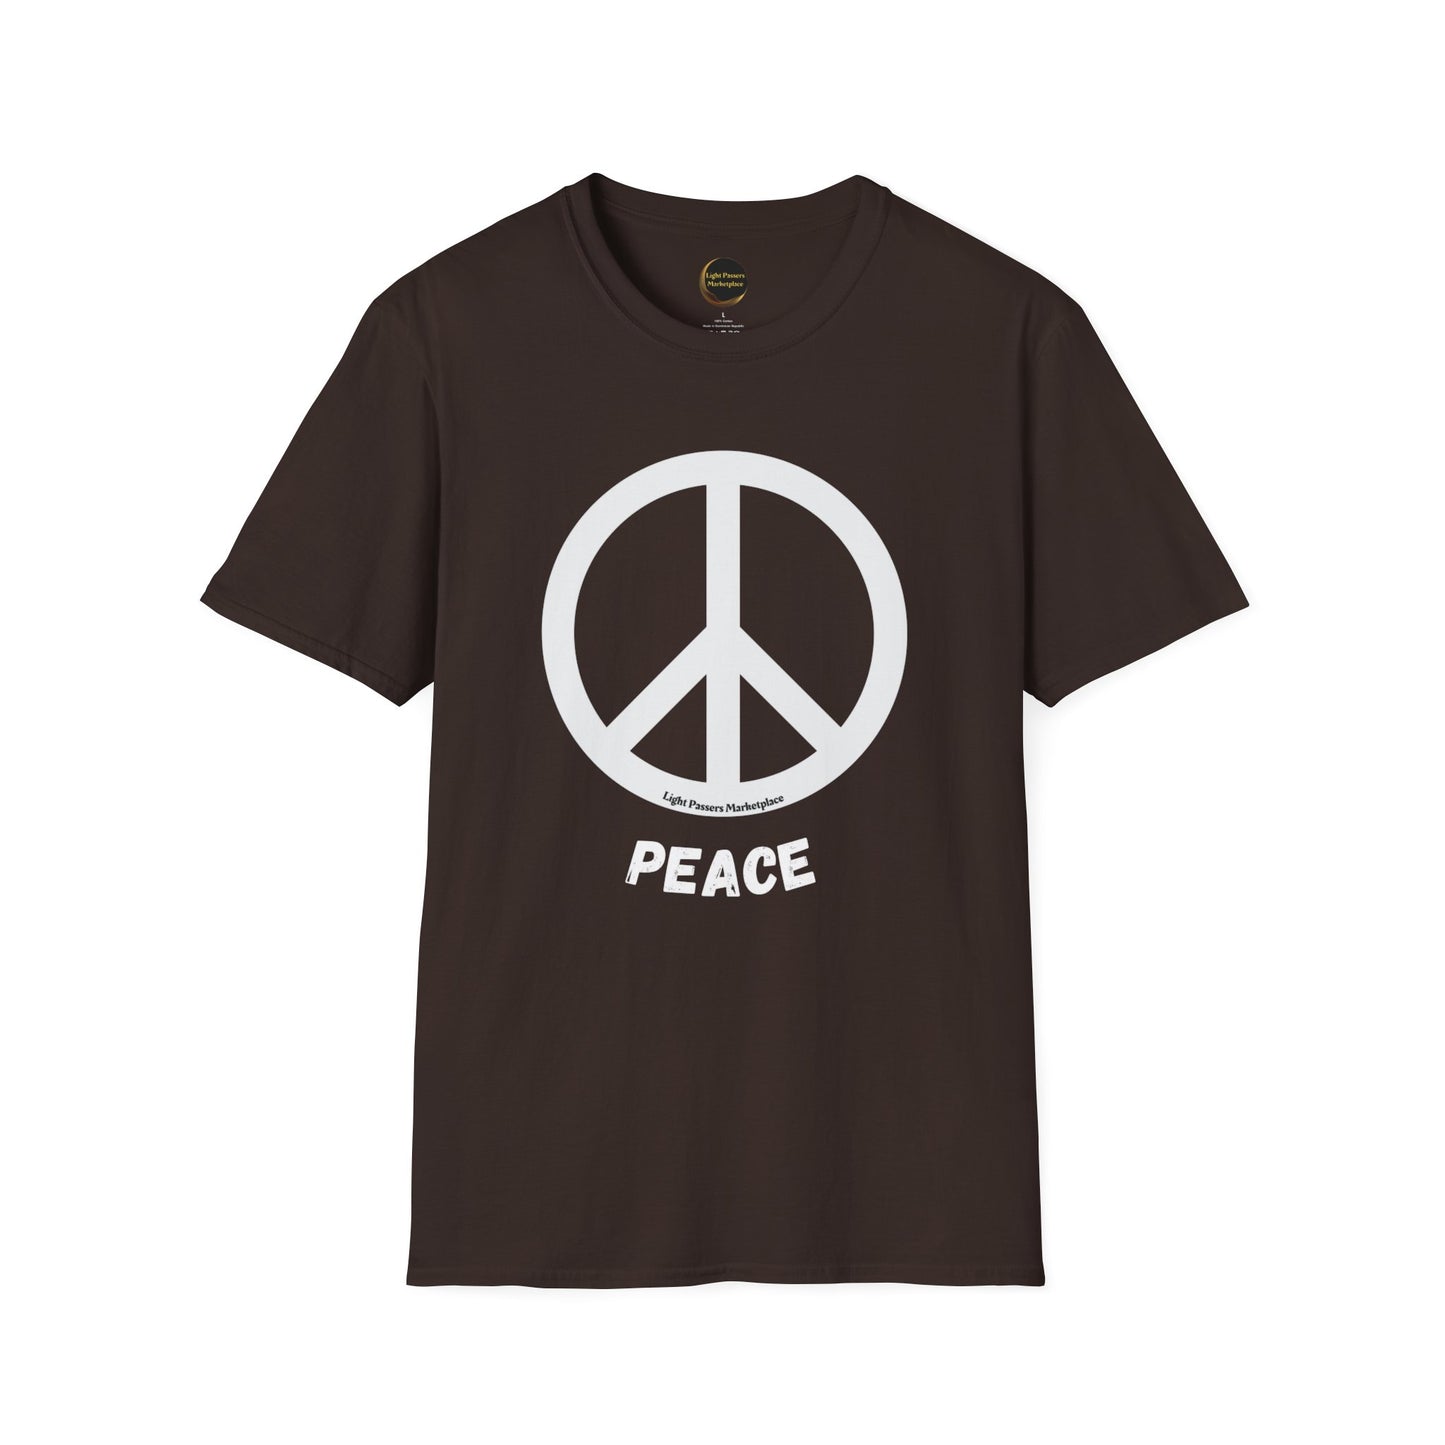 A soft unisex t-shirt featuring a peace sign logo on a brown background. Made of 100% cotton with twill tape shoulders for durability and a ribbed collar. Ethically sourced and Oeko-Tex certified.